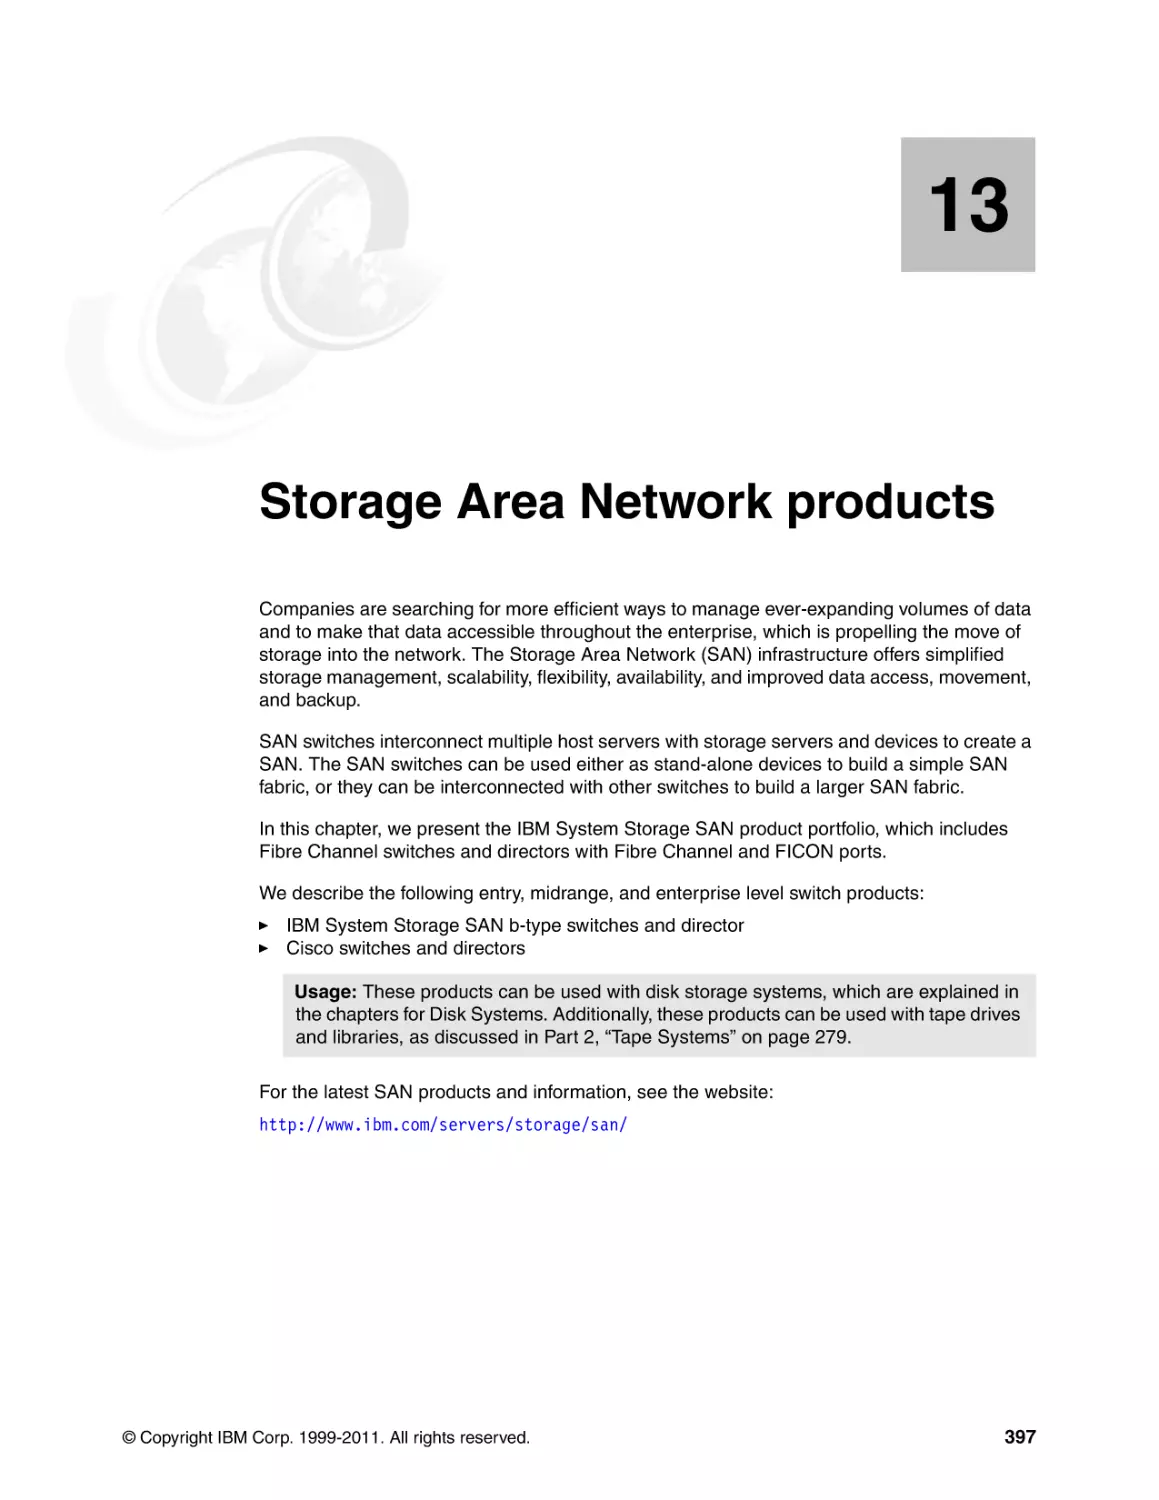 Chapter 13. Storage Area Network products